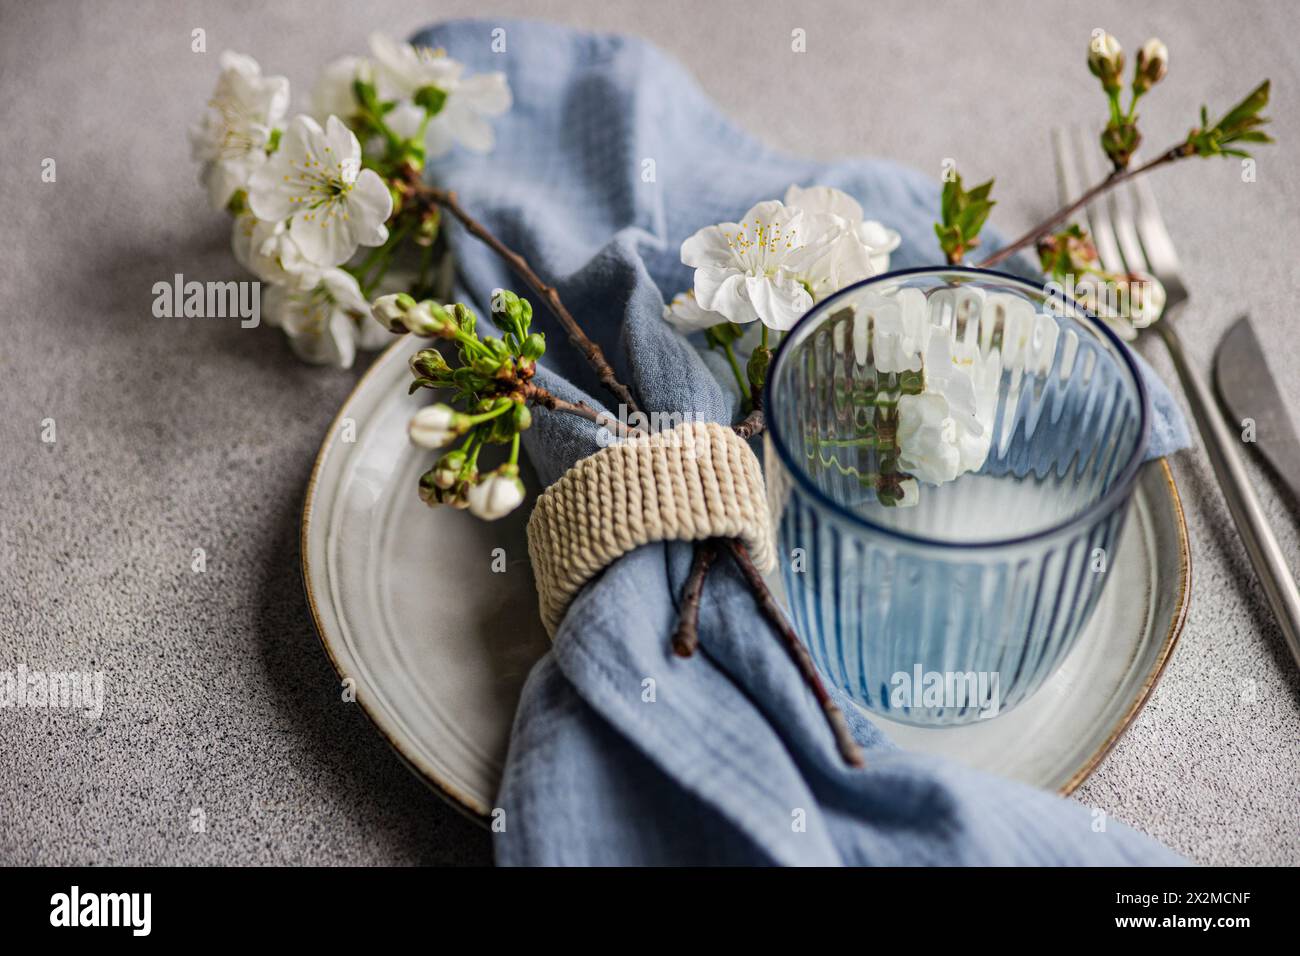 A fresh cherry blossom branch complements a serene table setting with a rustic plate, striped glass, and a napkin ring against a textured background Stock Photo